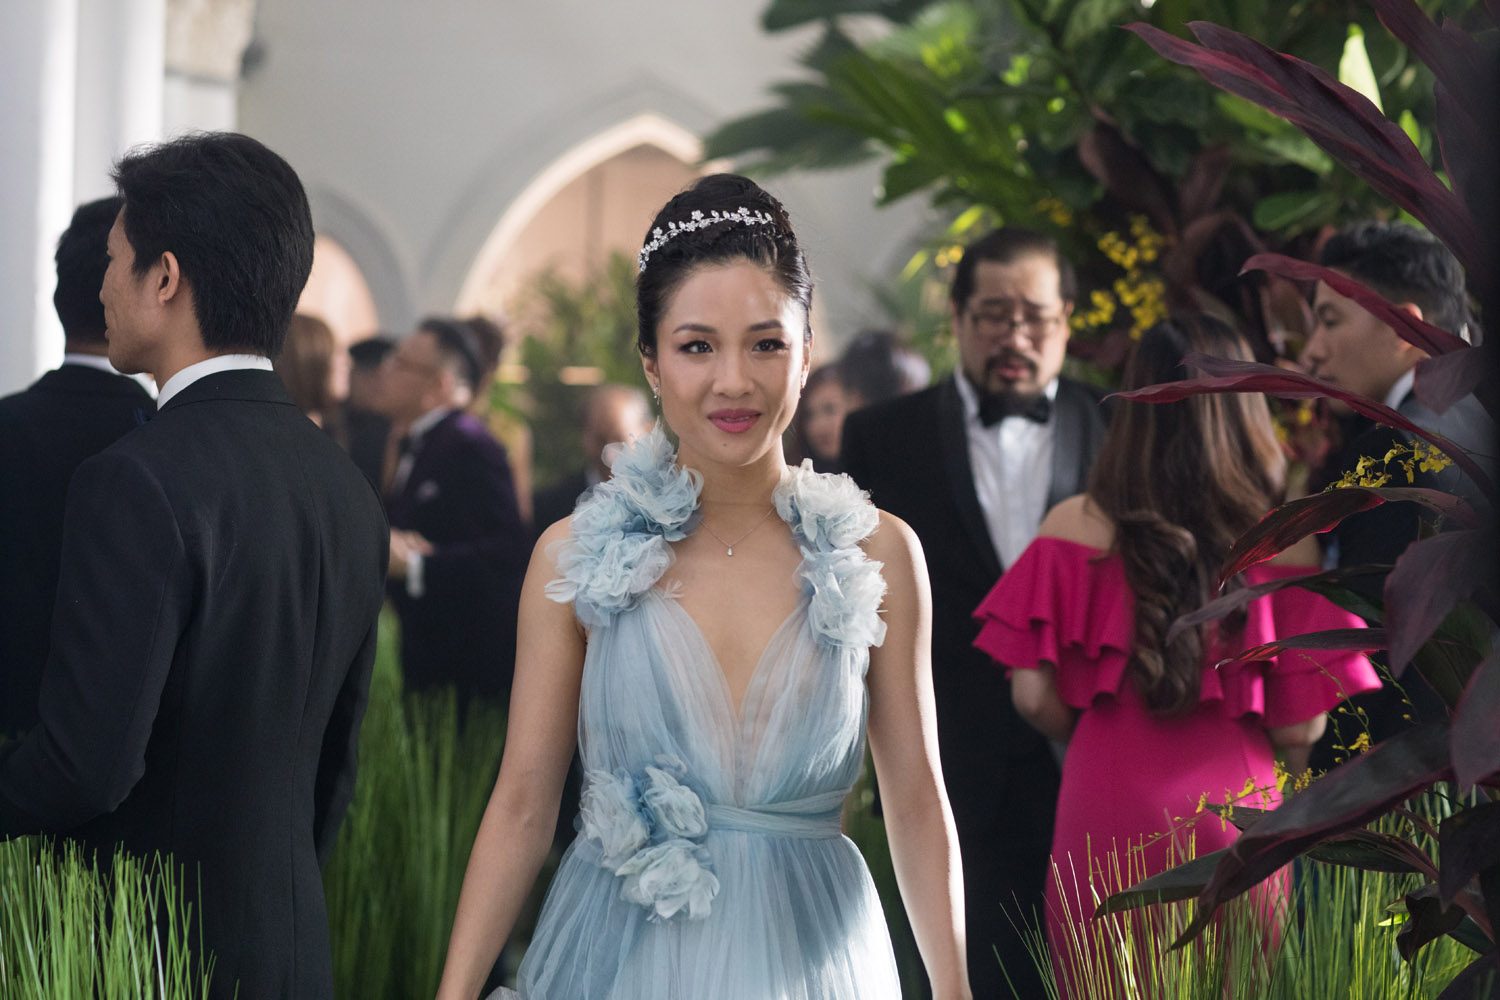 SOCIETY READY. The economics teacher steps out and dazzles during Colin and Araminta's wedding. Image courtesy of Warner Bros. Entertainment Inc. and RatPac-Dune Entertainment LLC 